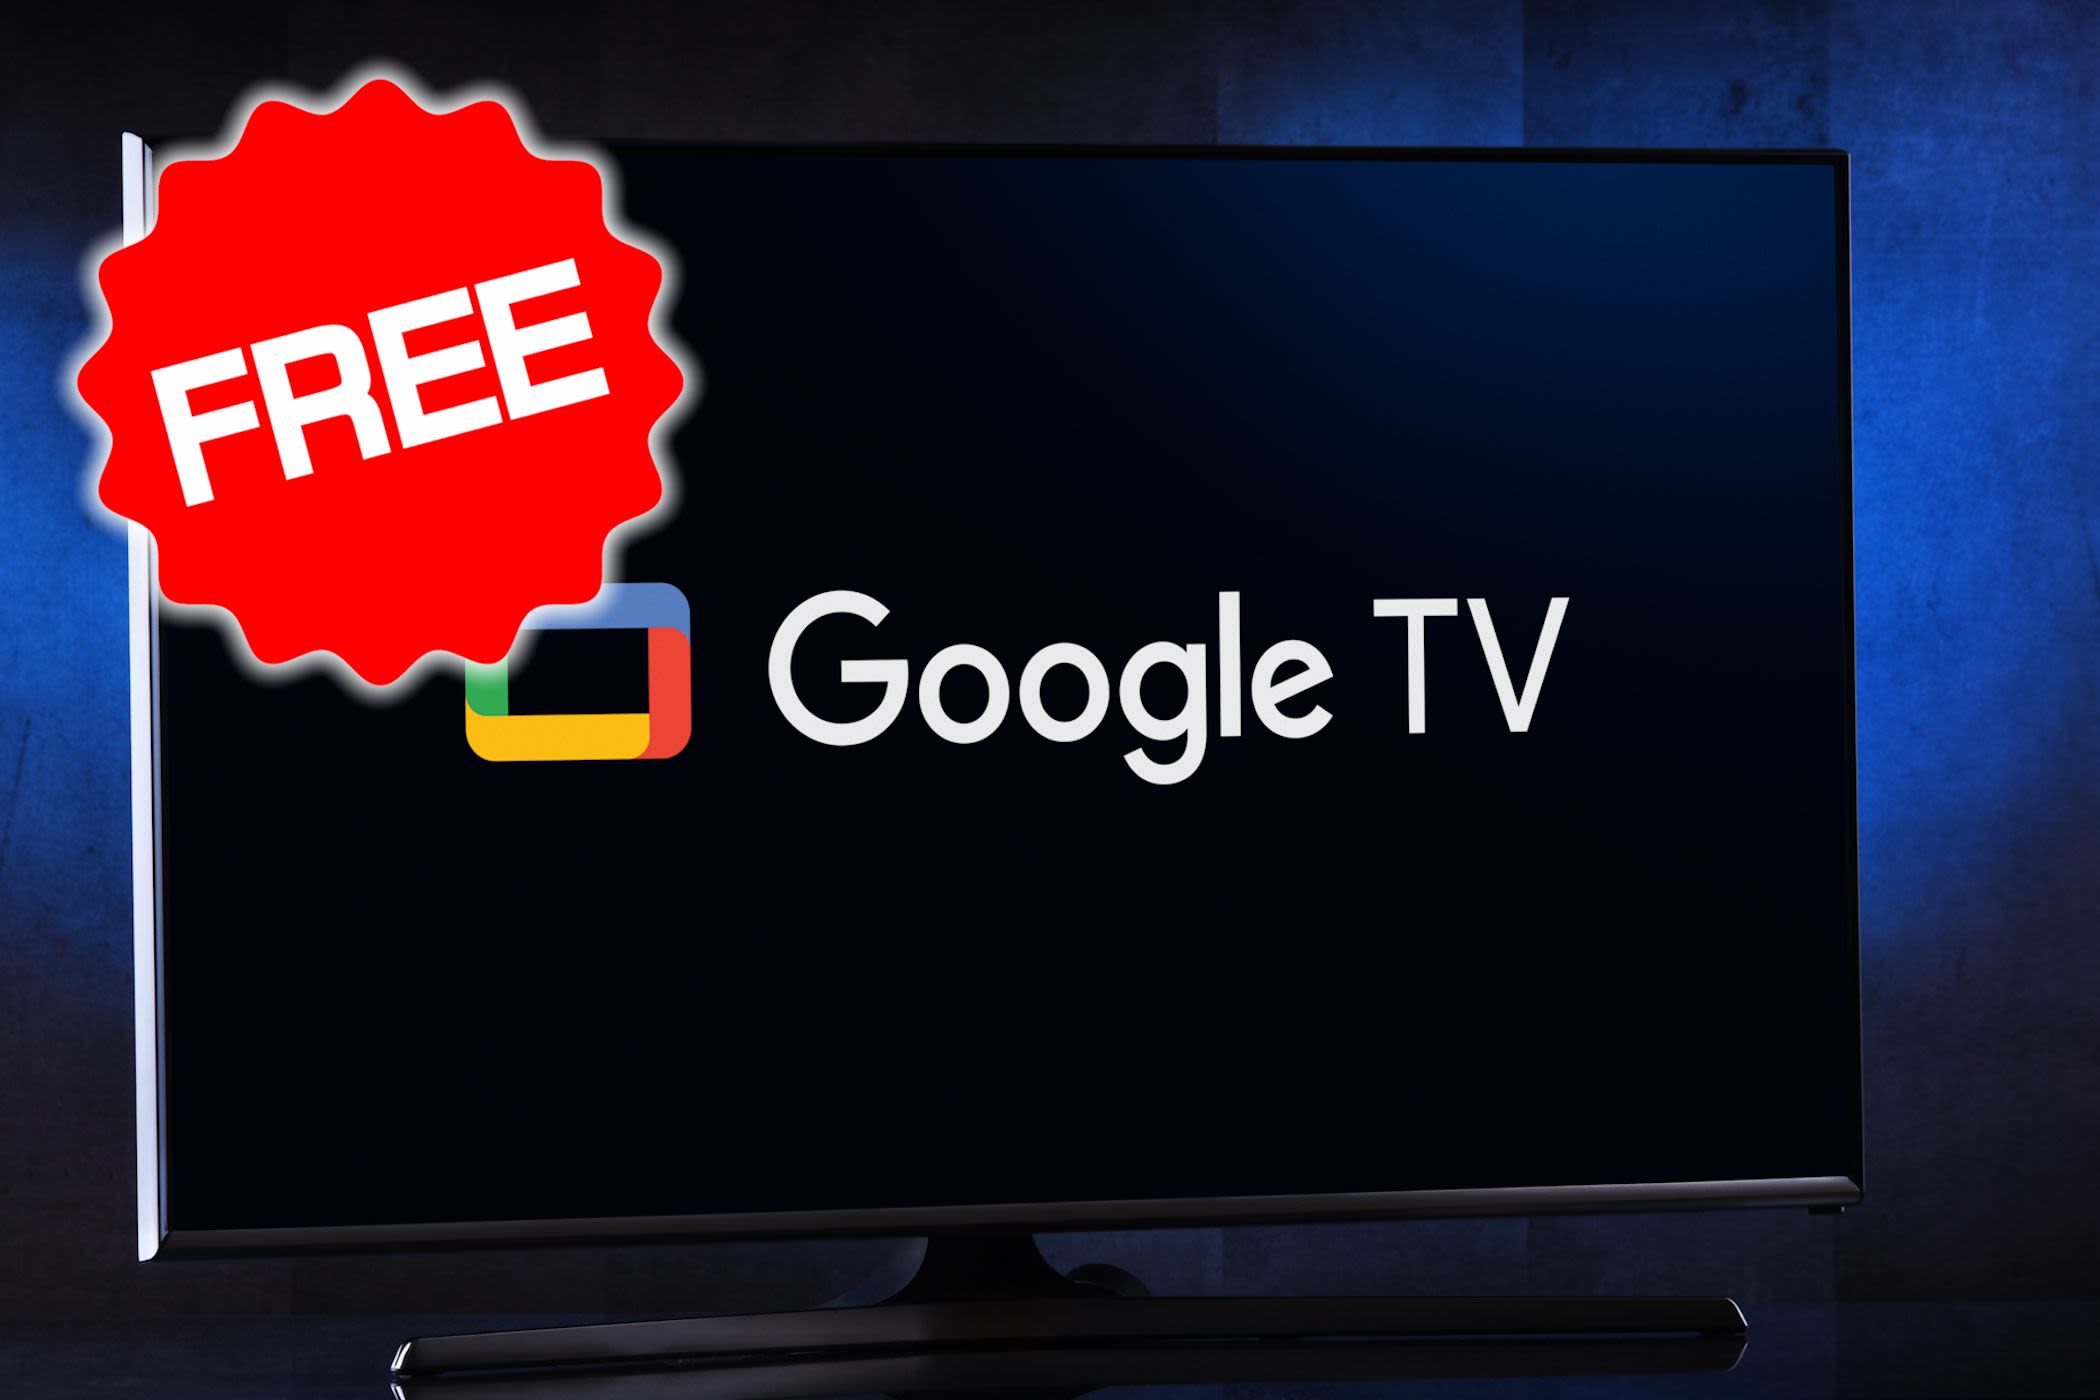 The 10 Best Free Google TV Channels You Can't Miss